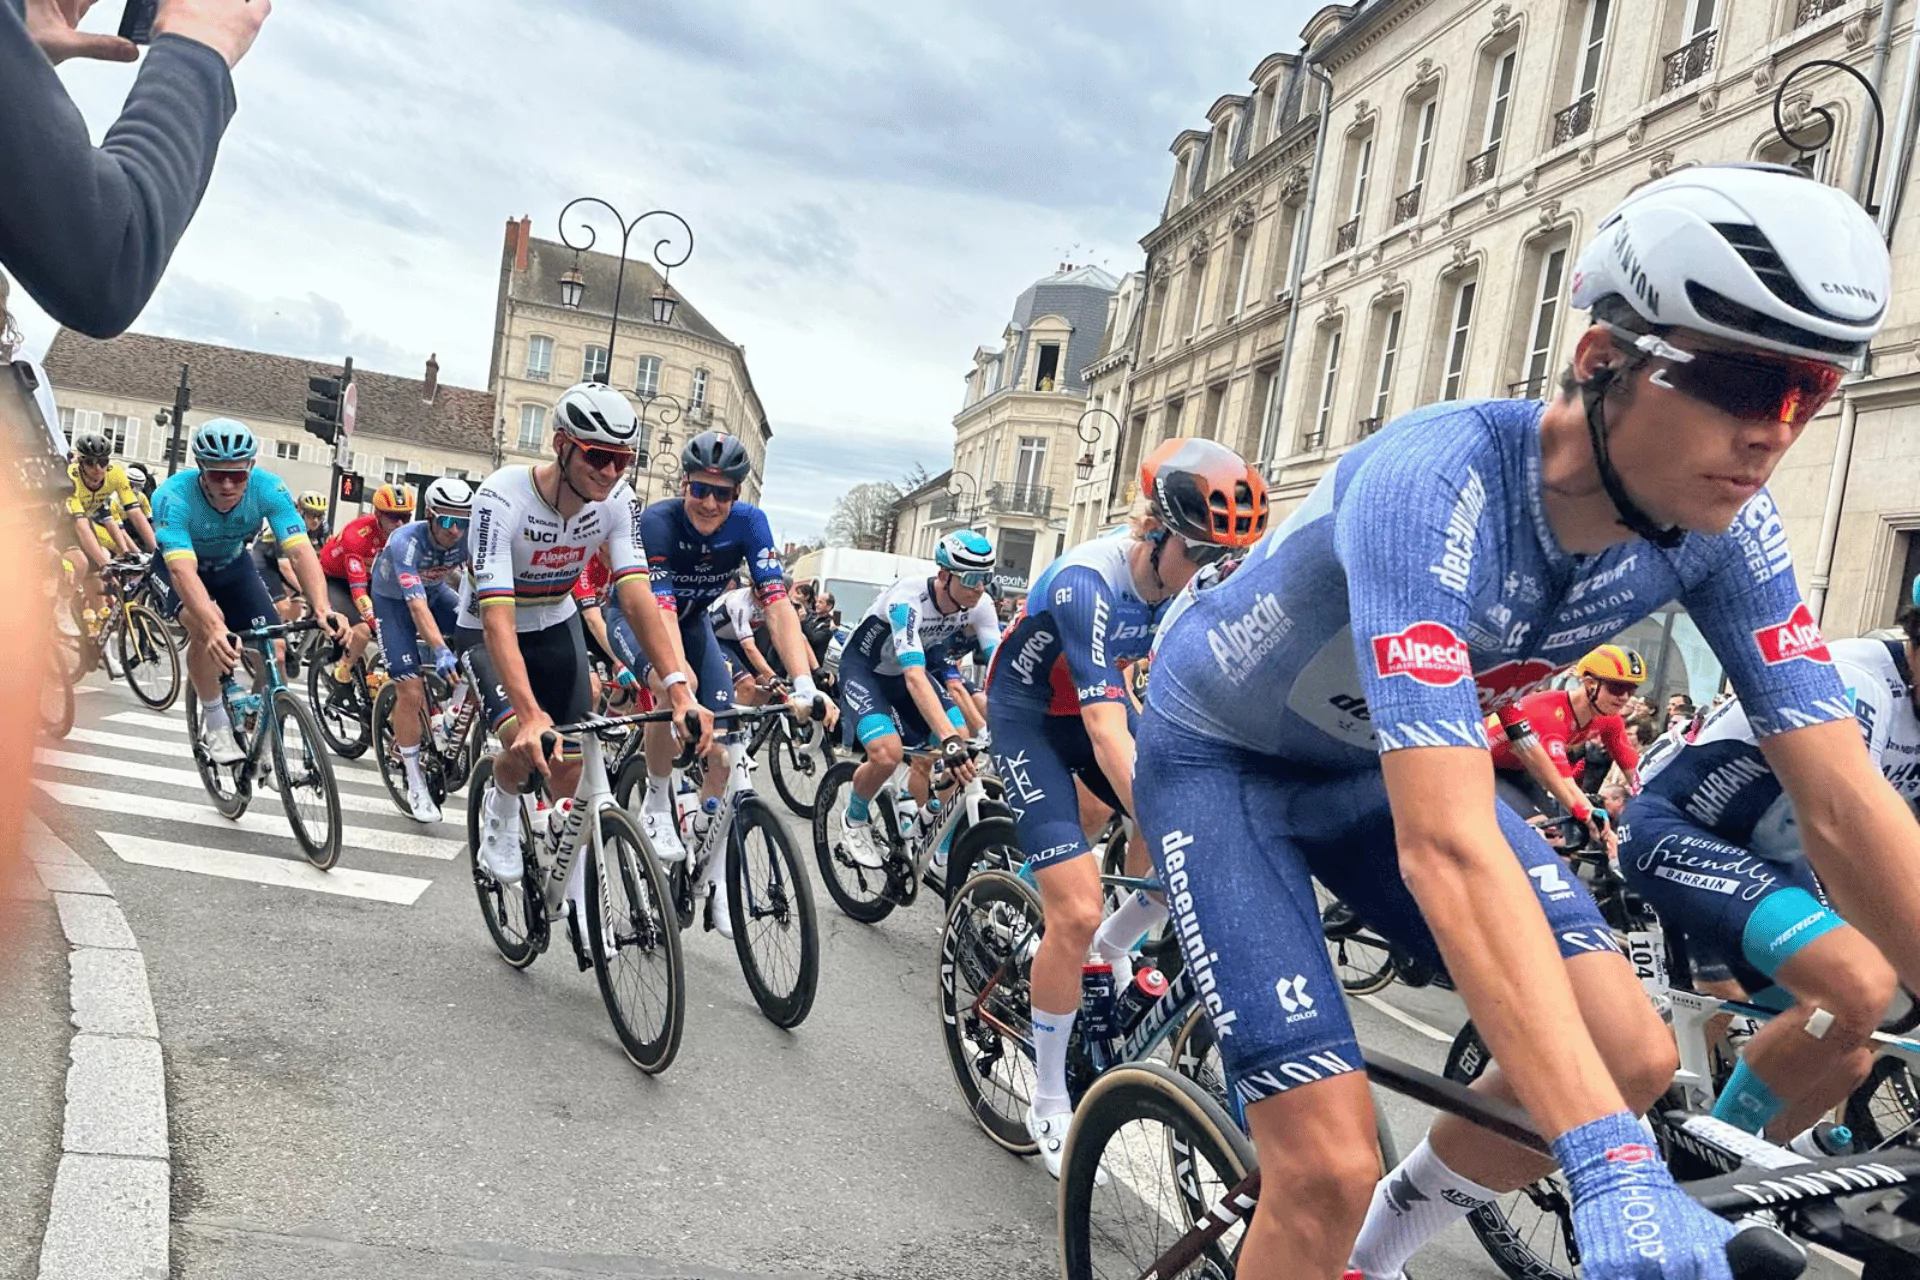 A peloton of road cyclists riding in tight formation through the streets of Compiègne